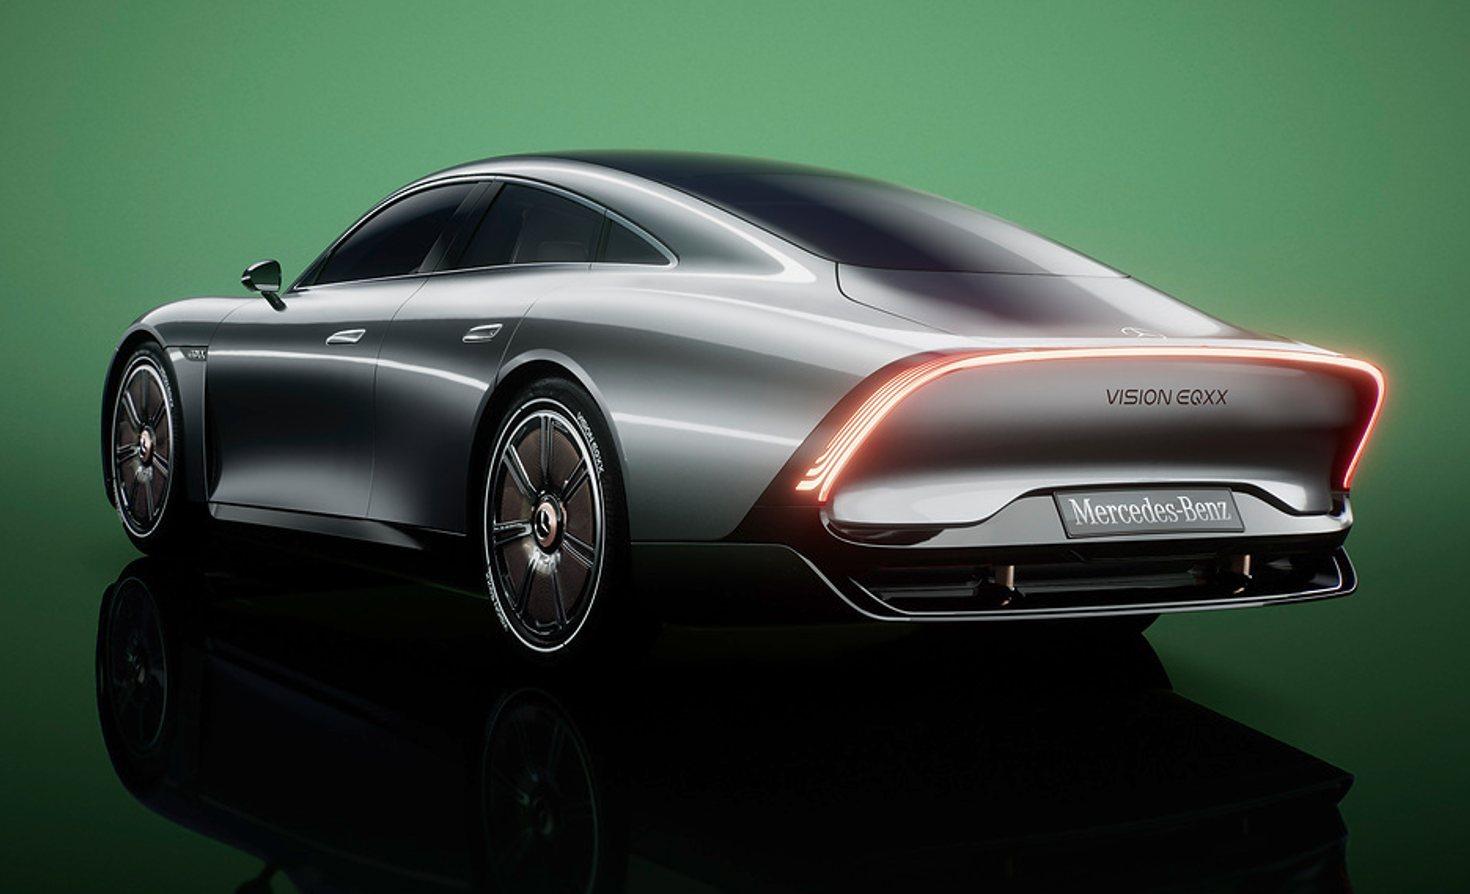 The prototype Mercedes Vision EQXX would outlast every EVs on the market.